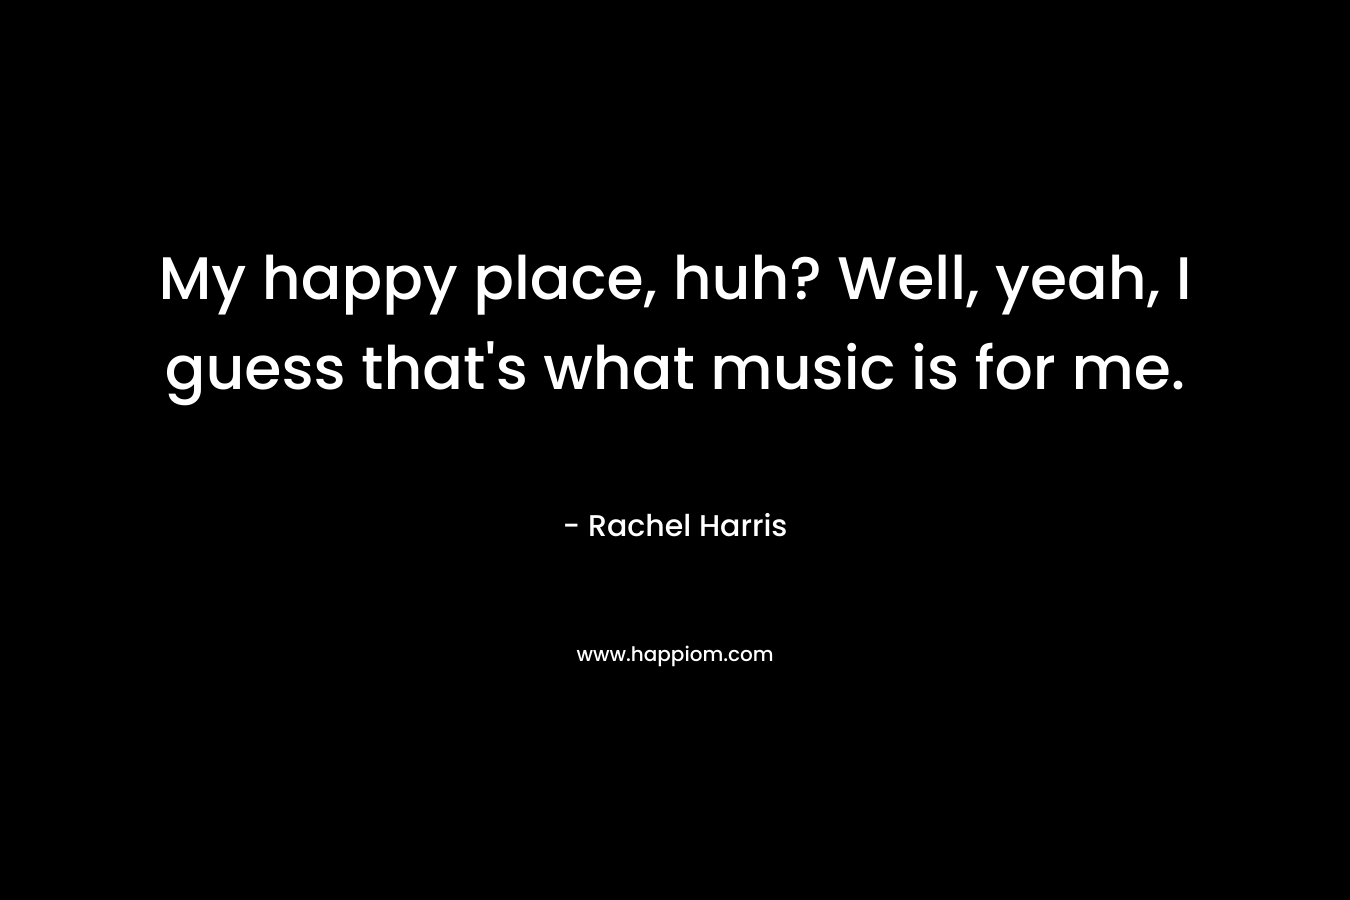 My happy place, huh? Well, yeah, I guess that's what music is for me.